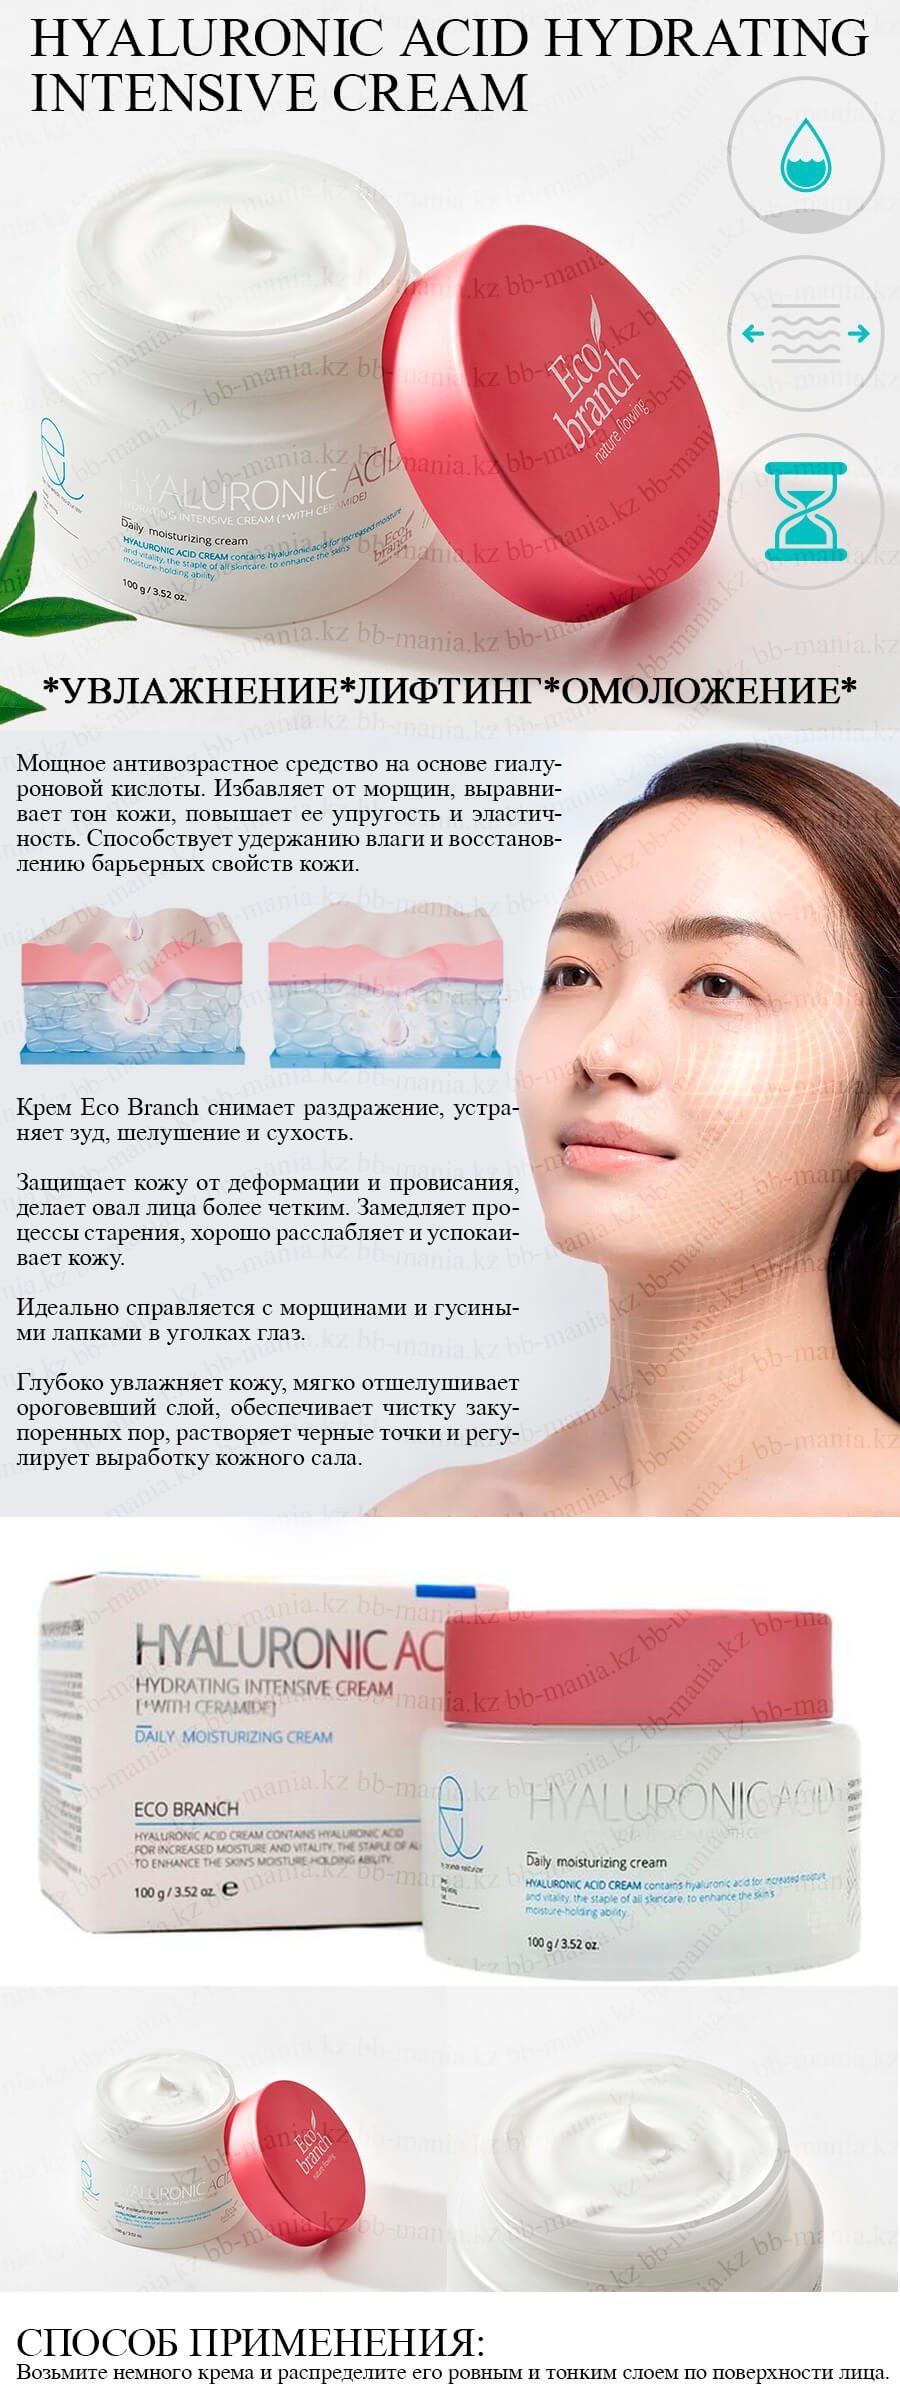 Hyaluronic Acid Hydrating Intensive Cream [Eco Branch]